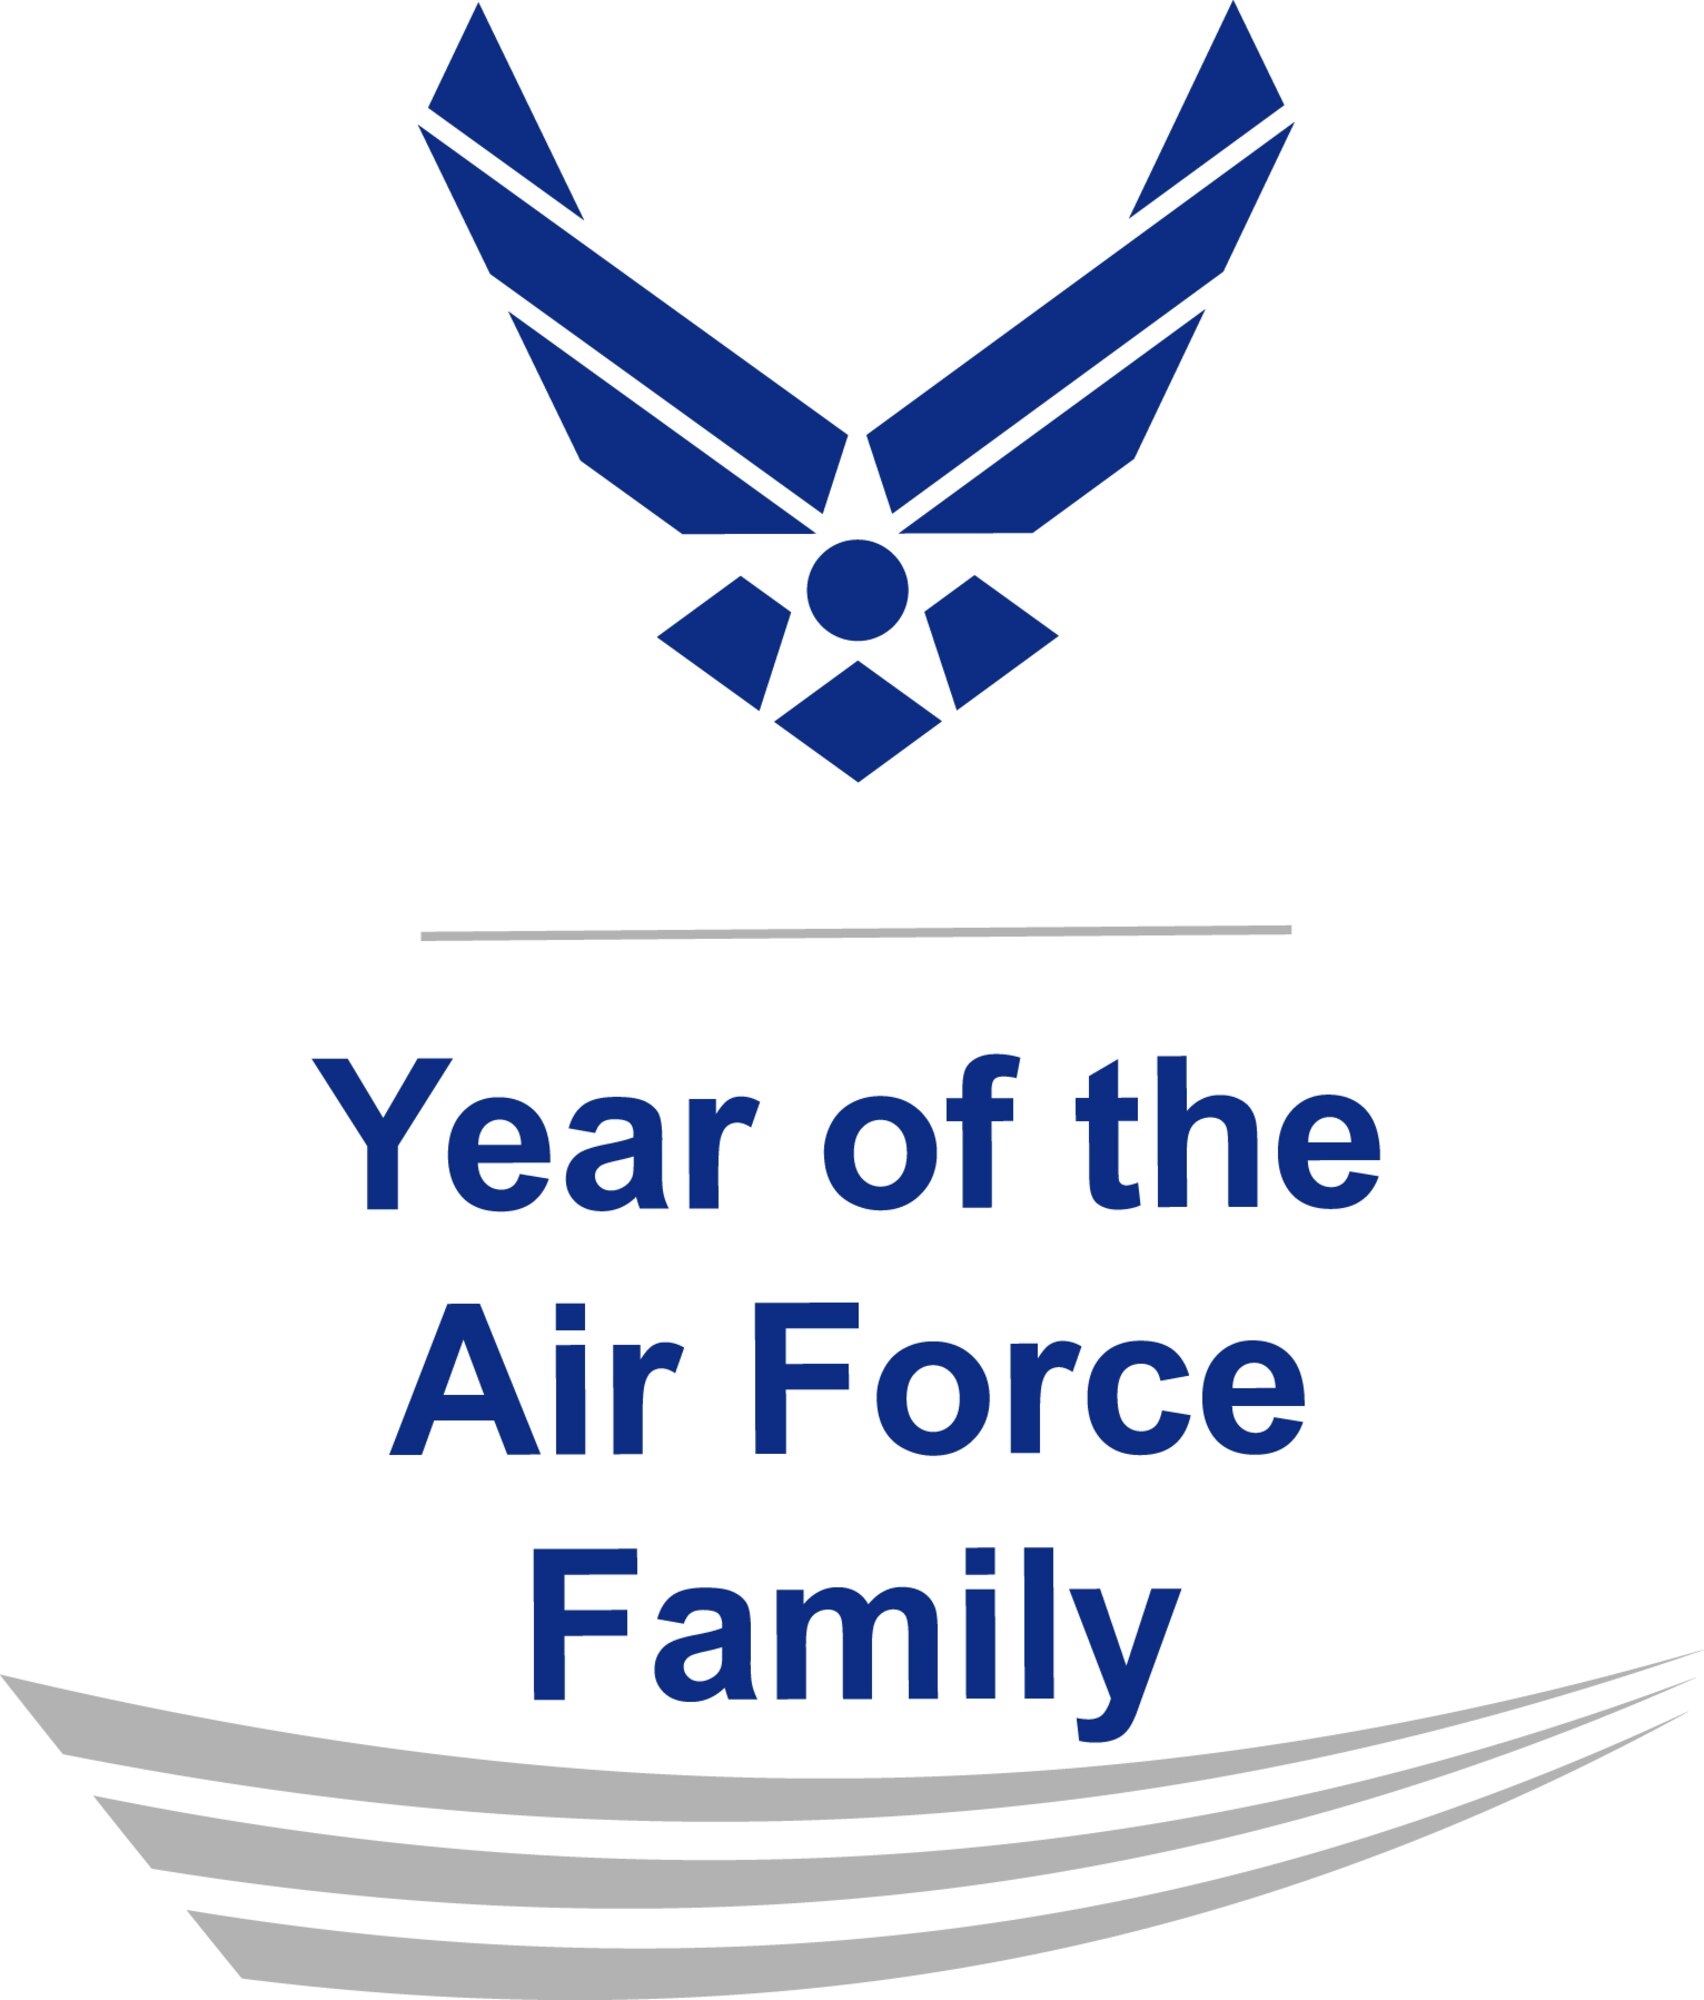 Year of the Air Force Family. 